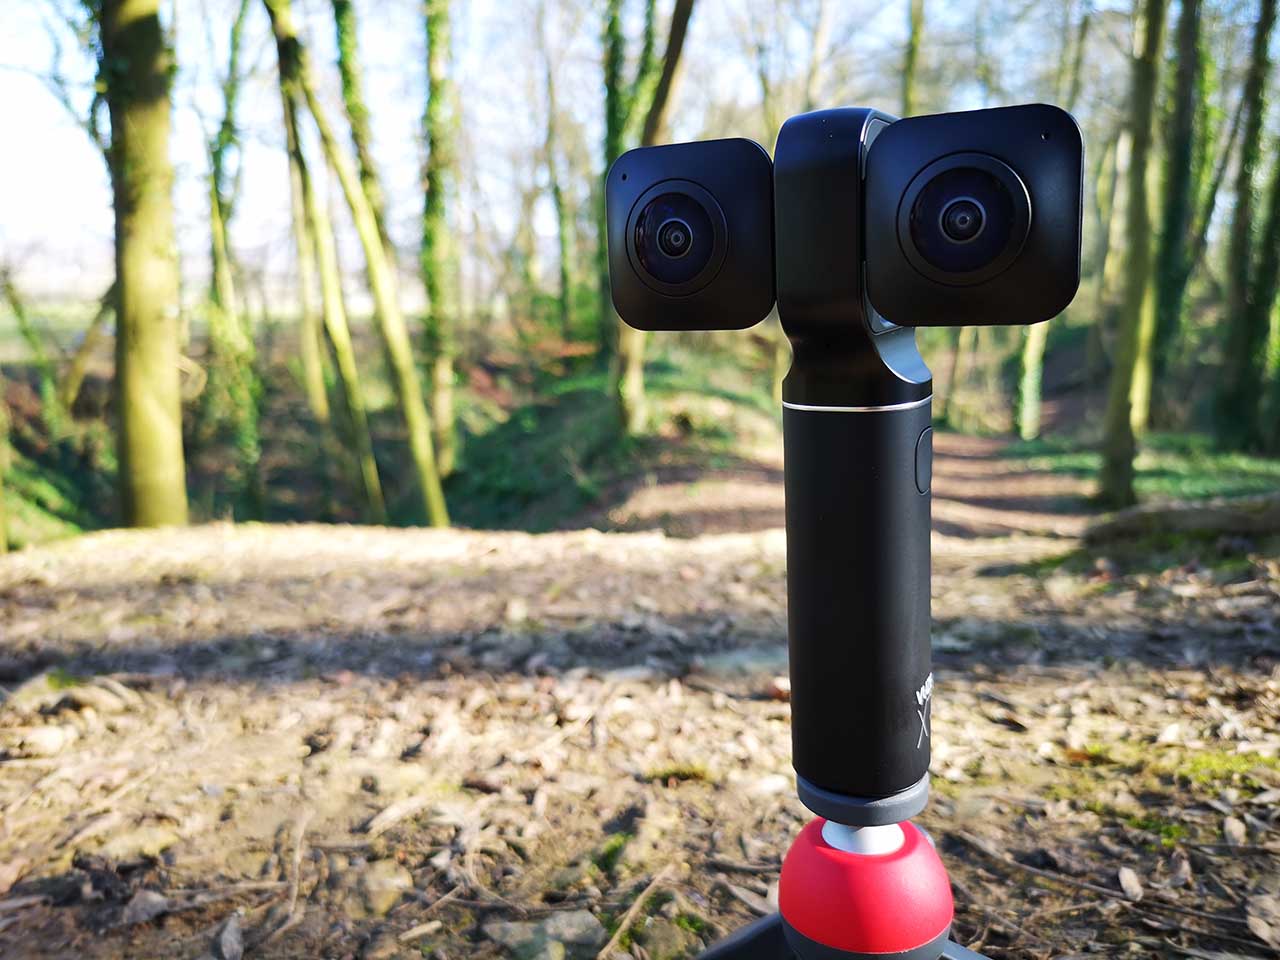 HumanEyes Vuze XR review: build quality